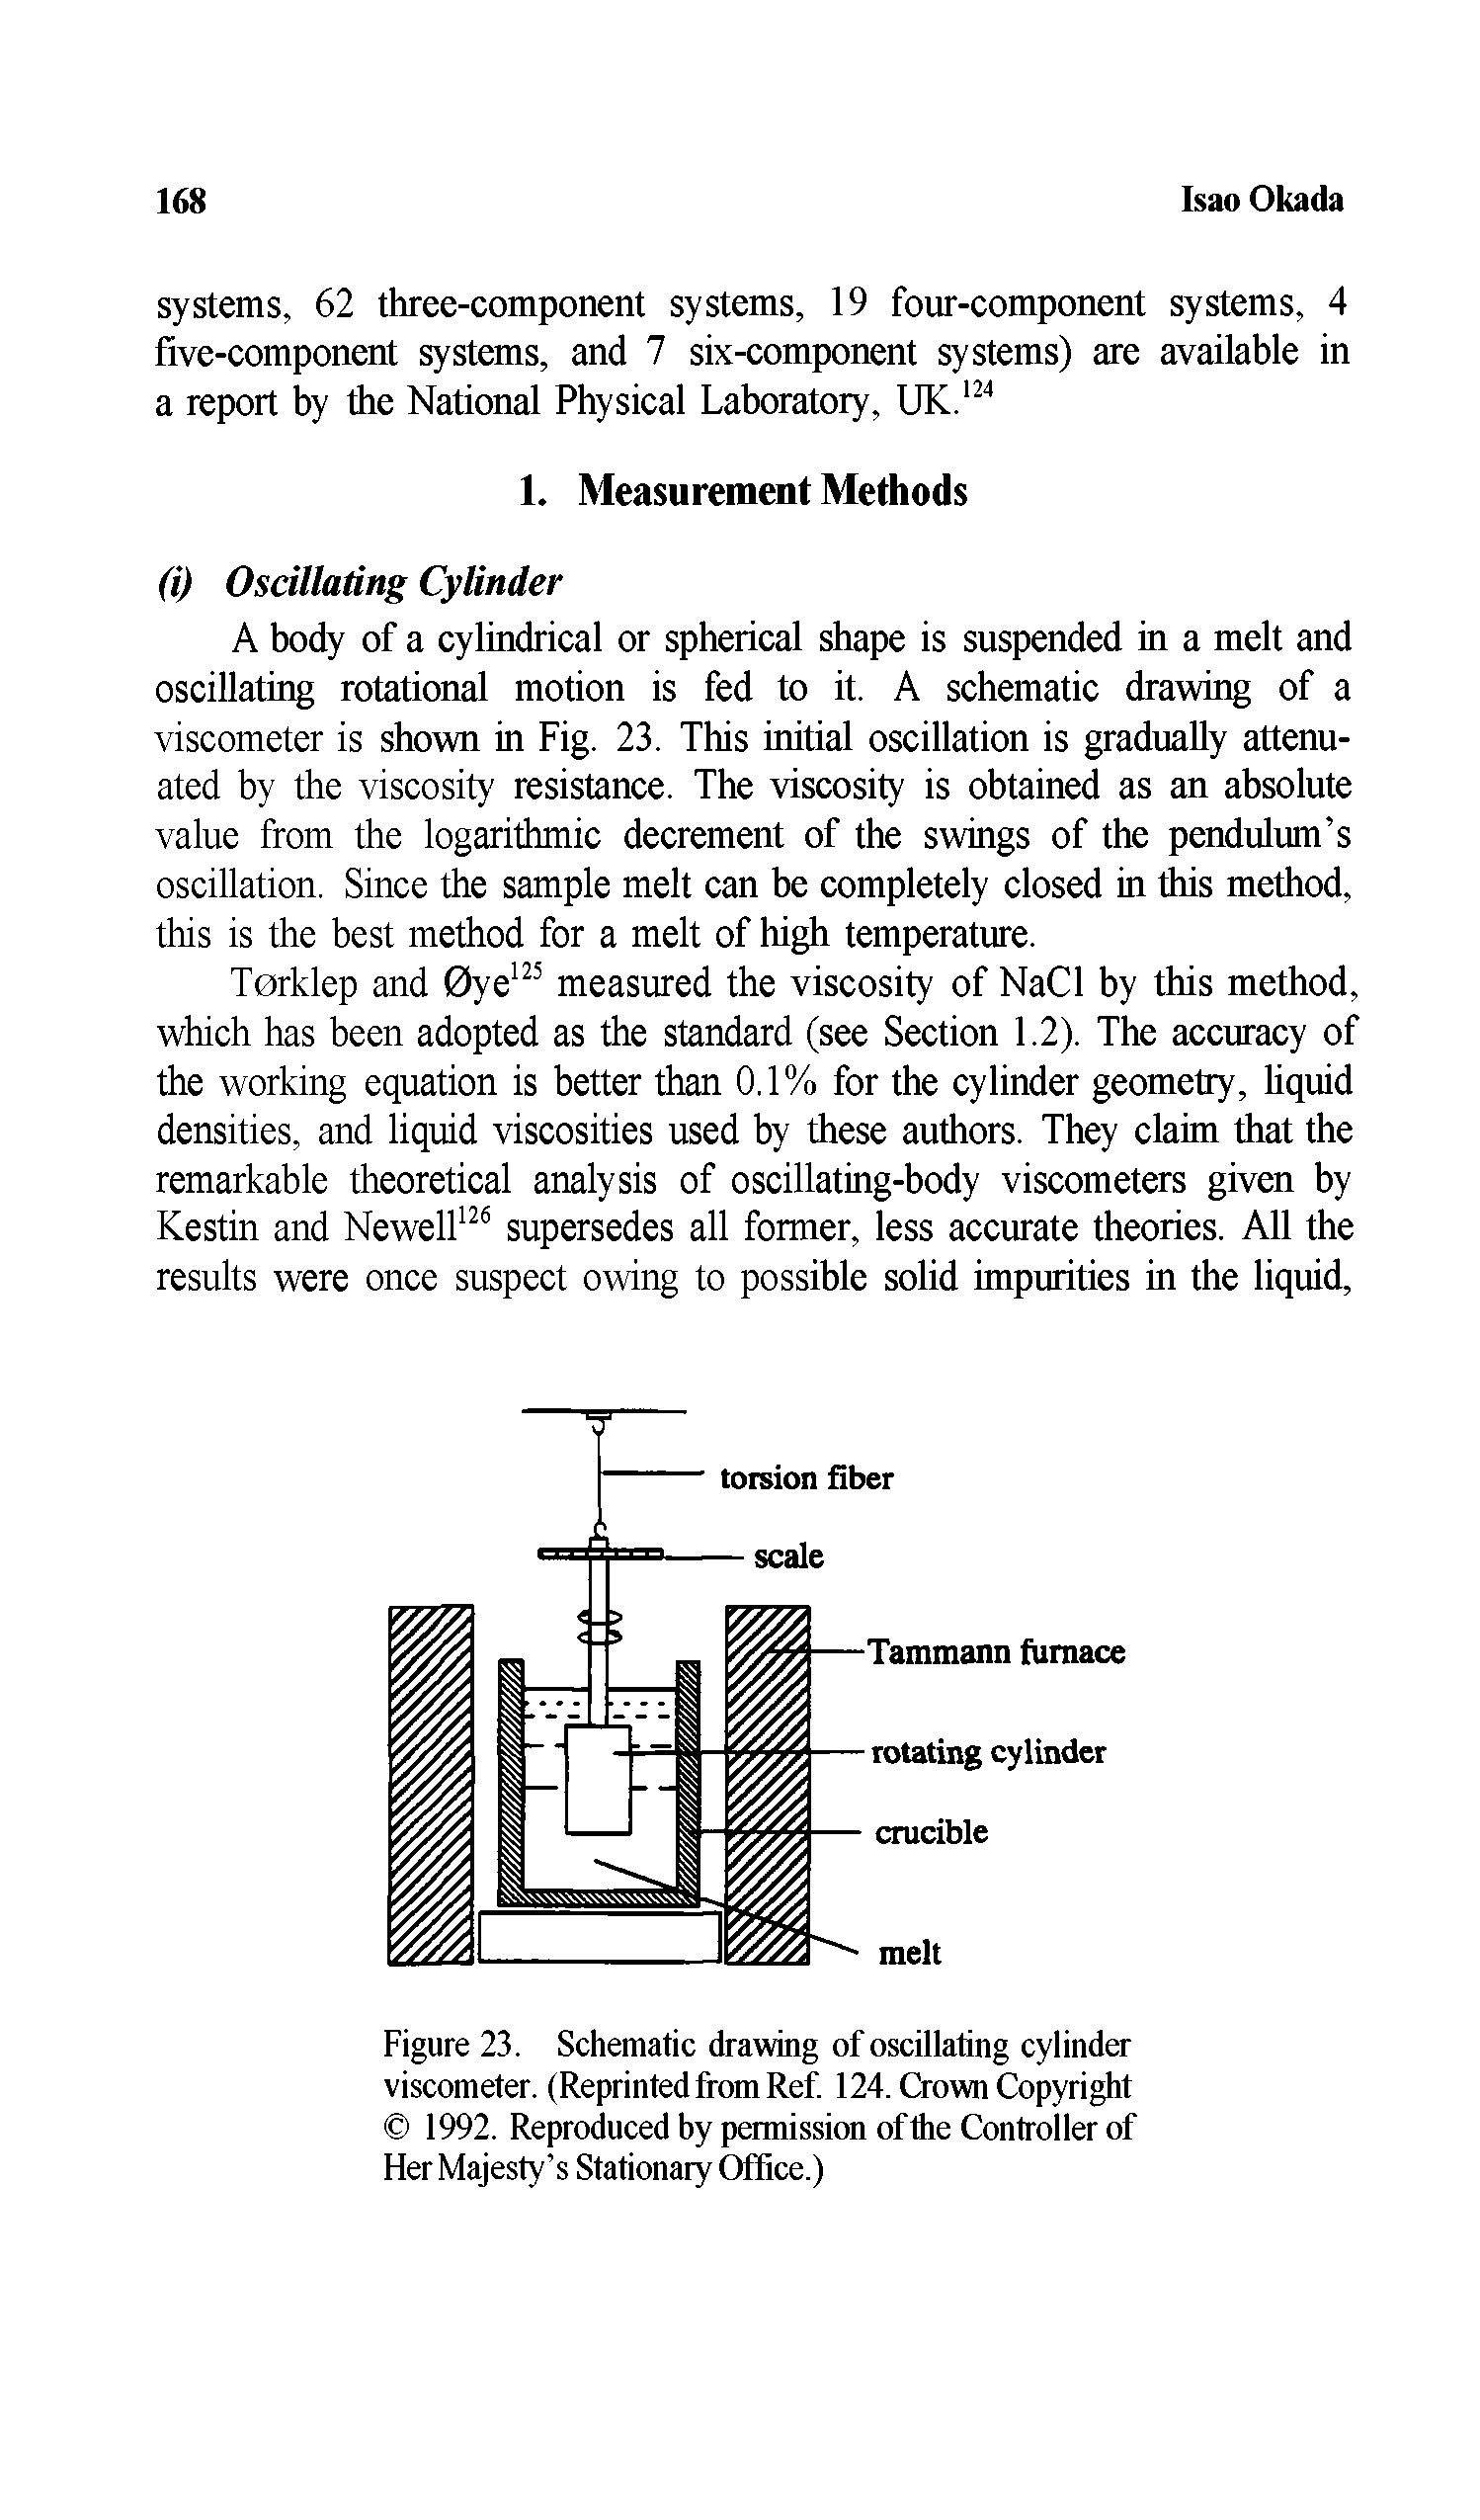 Figure 23. Schematic drawing of oscillating cylinder viscometer. (Reprinted from Ref 124. Crown Copyright 1992. Reproduced by permission ofthe Controller of Her Majesty s Stationary Office.)...